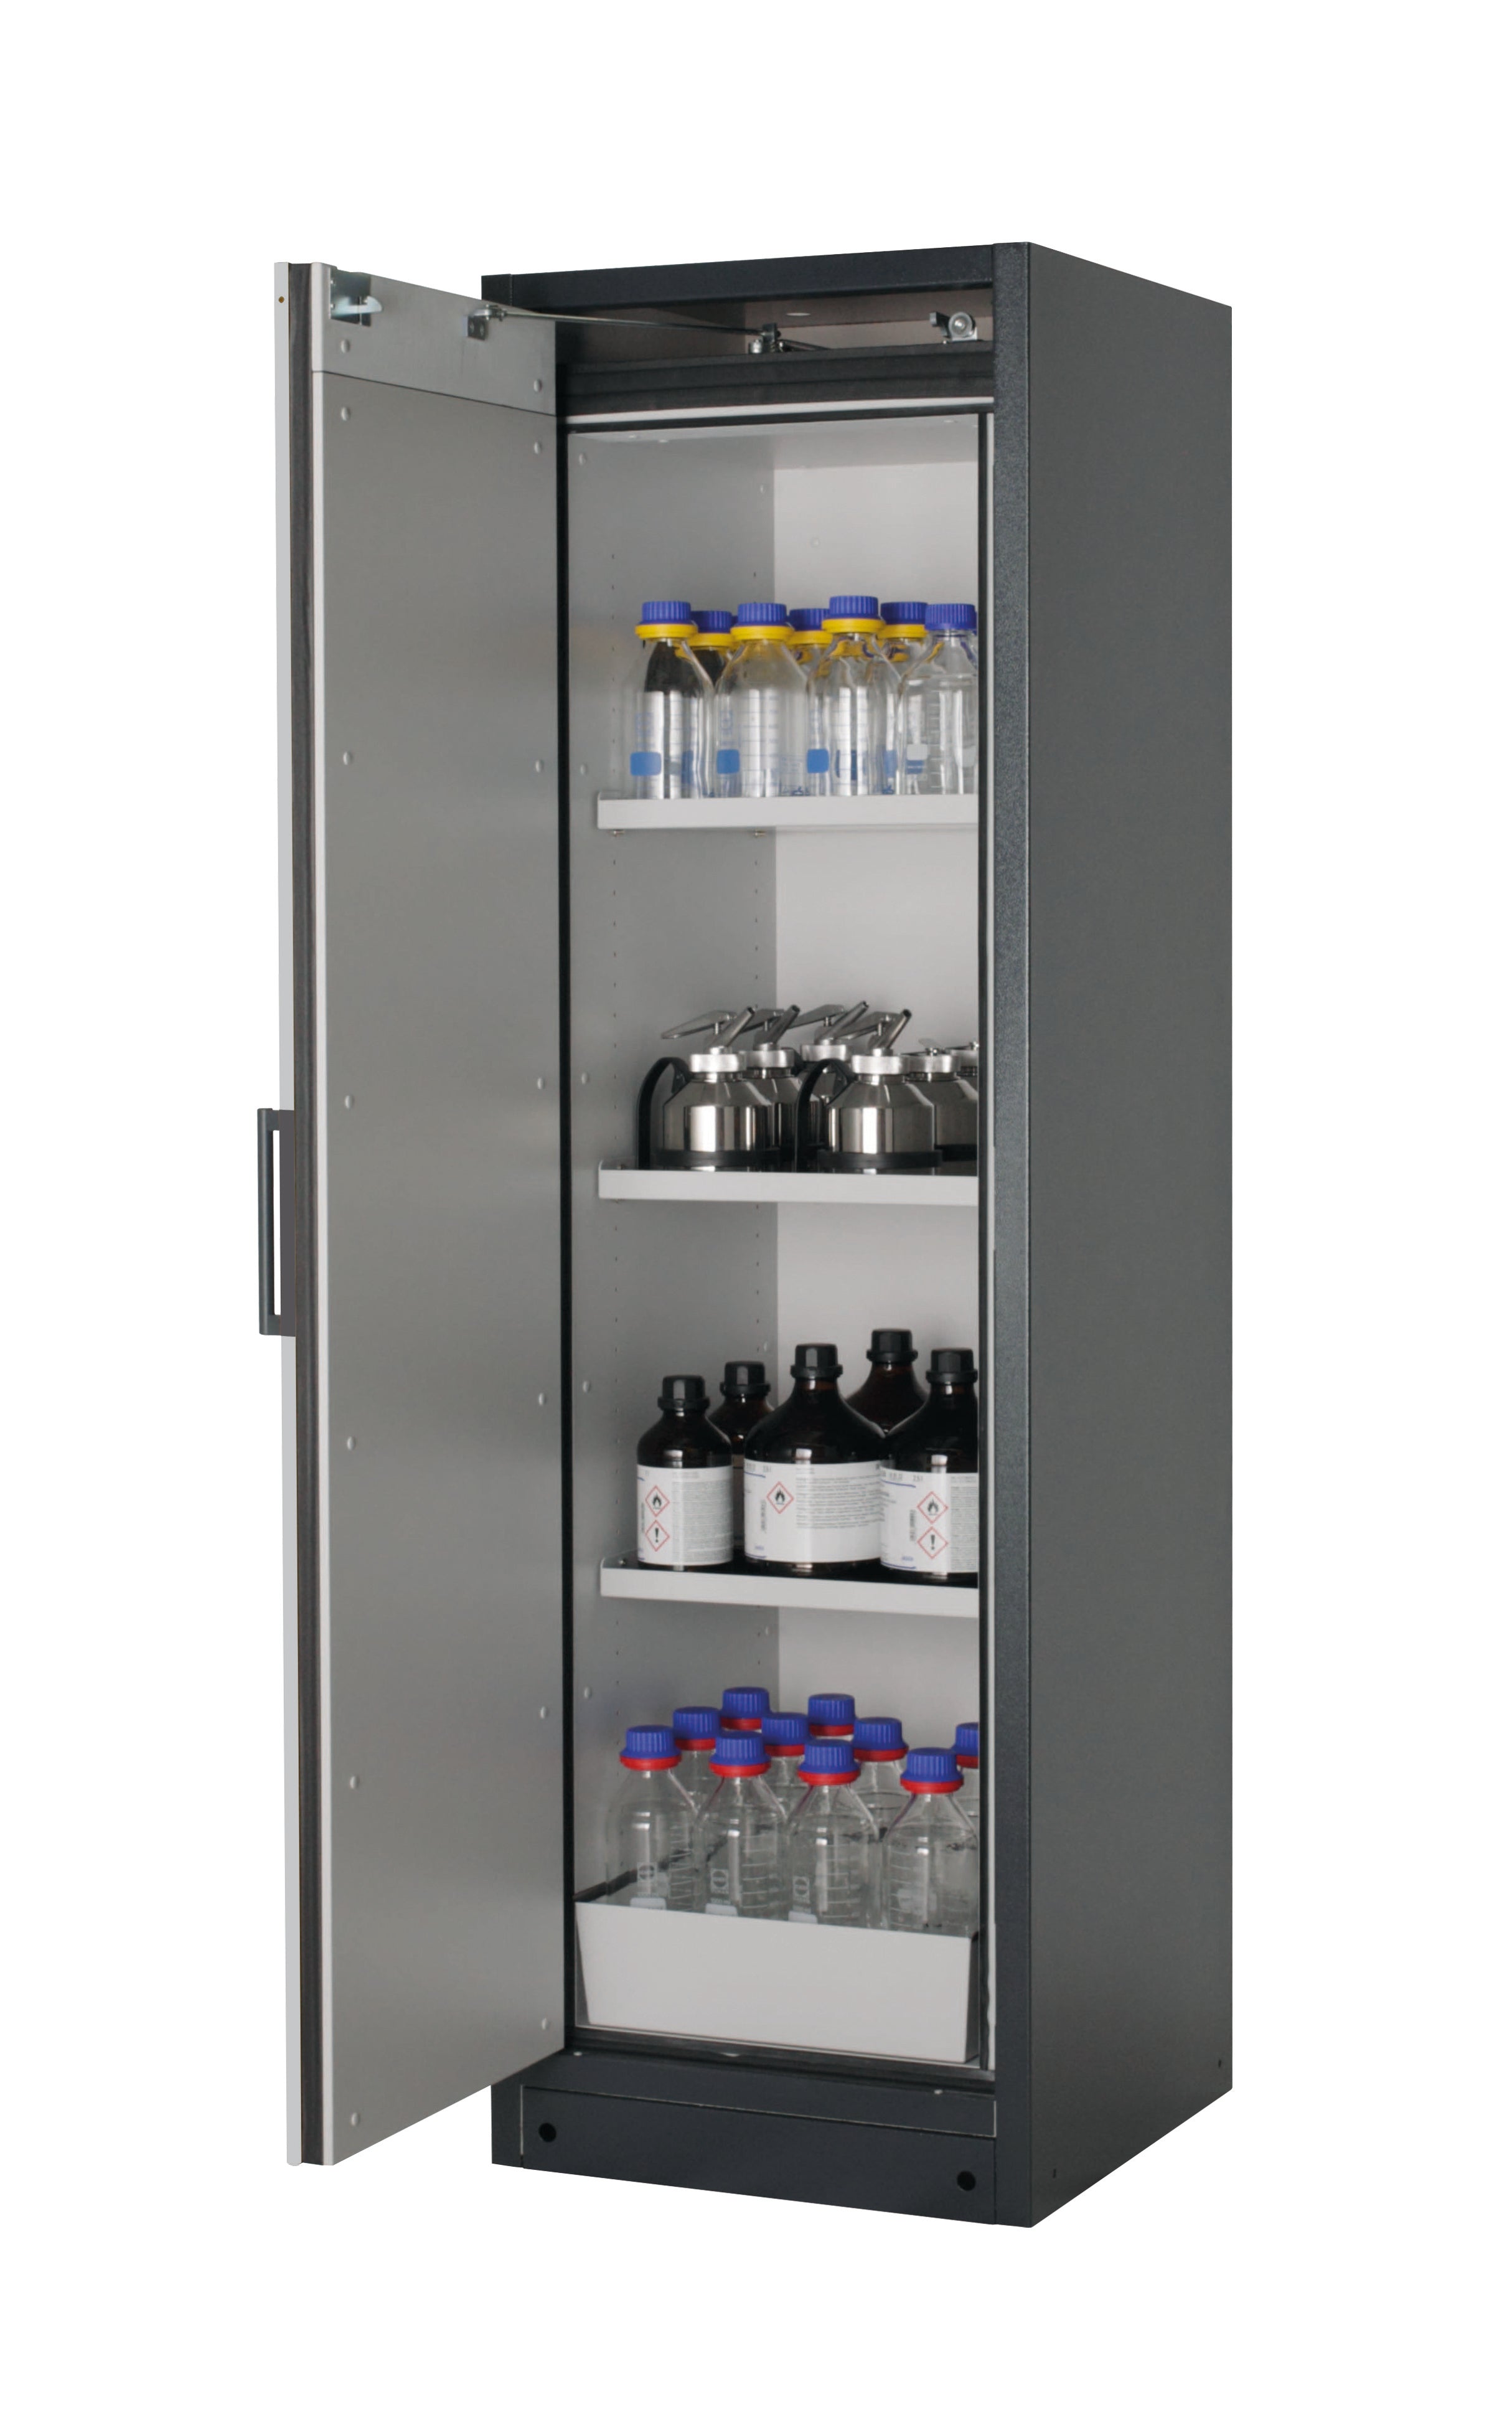 Type 90 safety storage cabinet Q-CLASSIC-90 model Q90.195.060 in light grey RAL 7035 with 3x shelf standard (sheet steel),